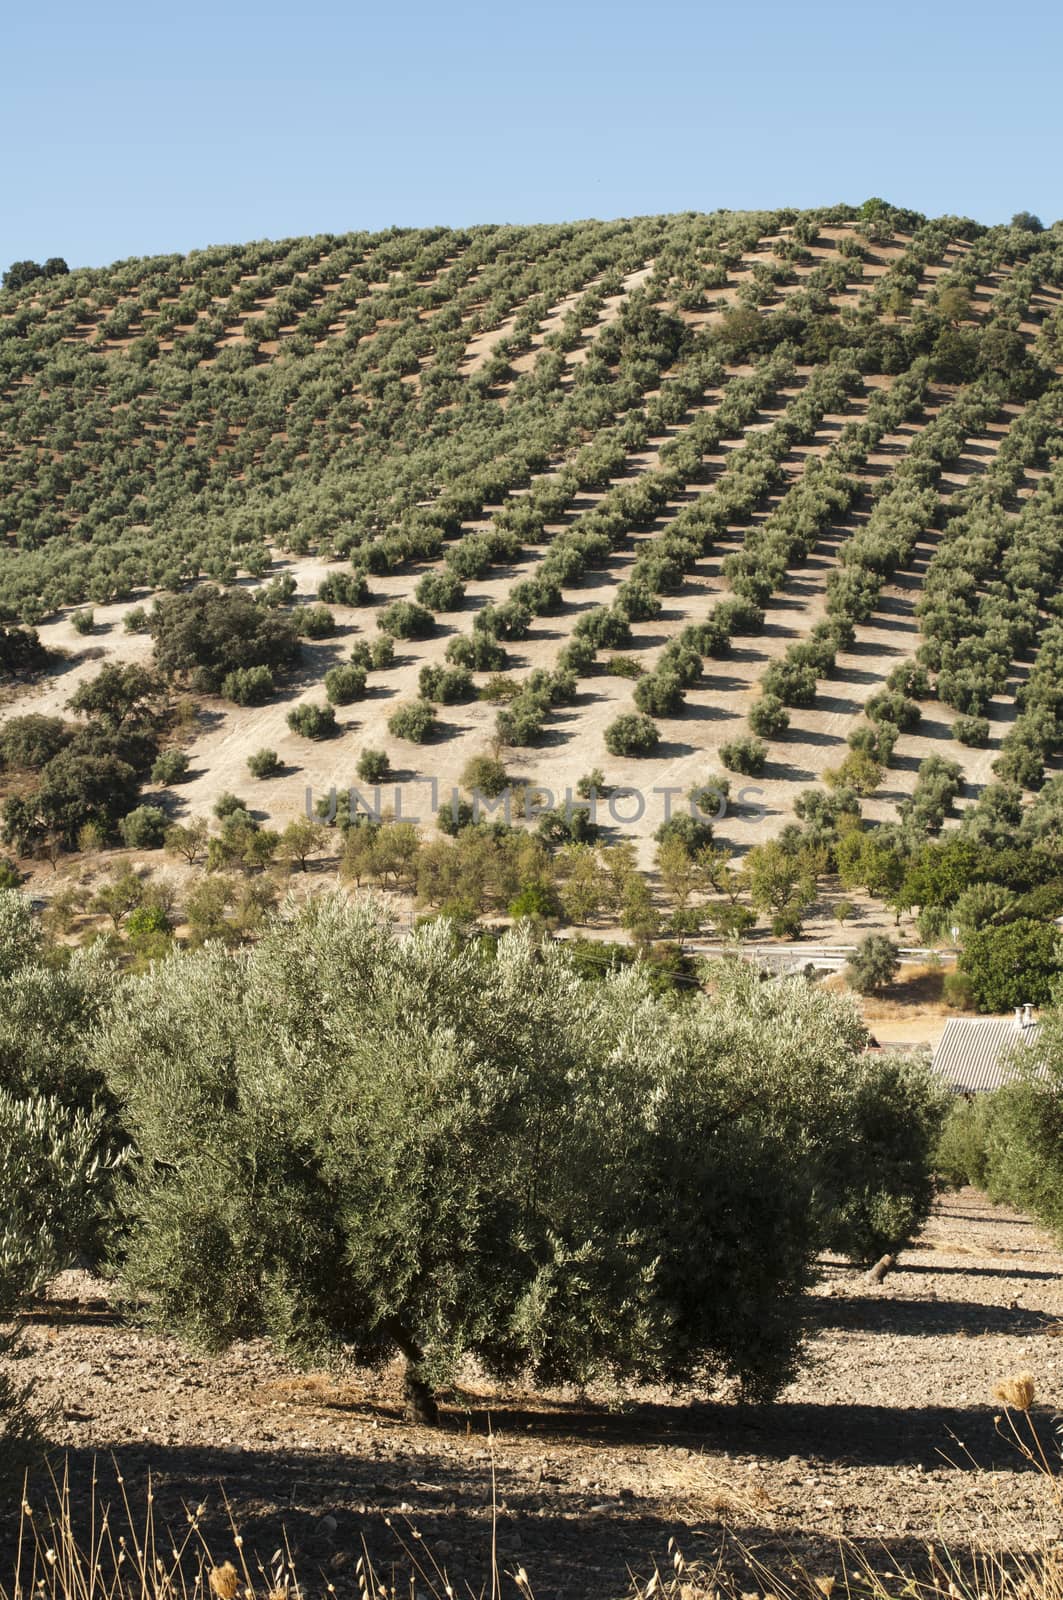 Olive trees in plantation. Rows of trees